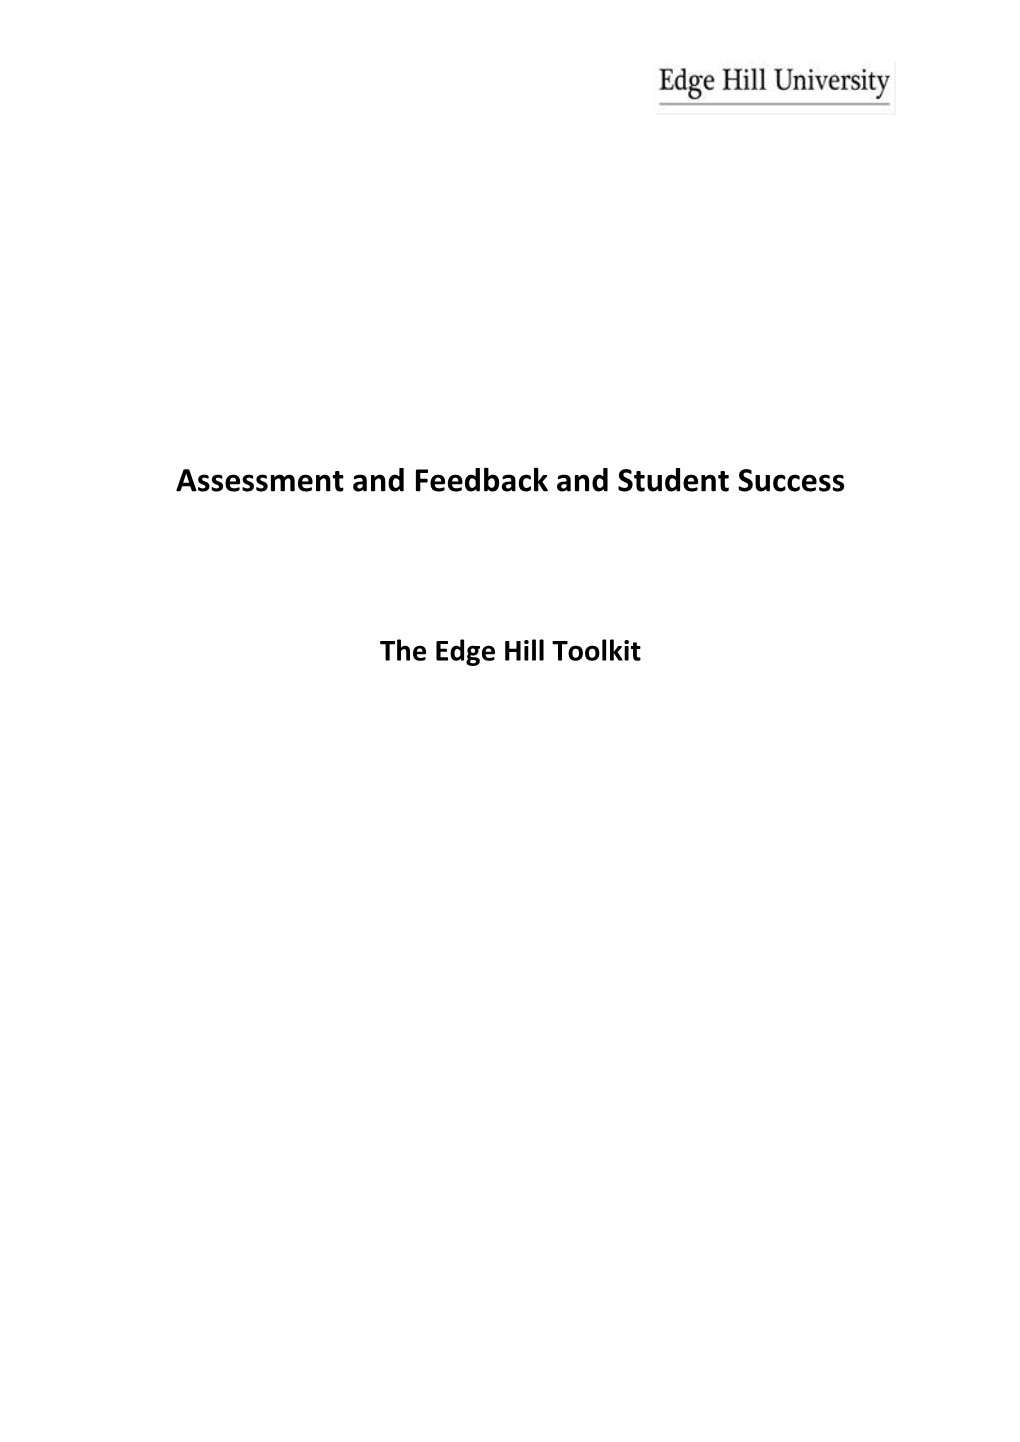 Assessment and Feedback and Student Success